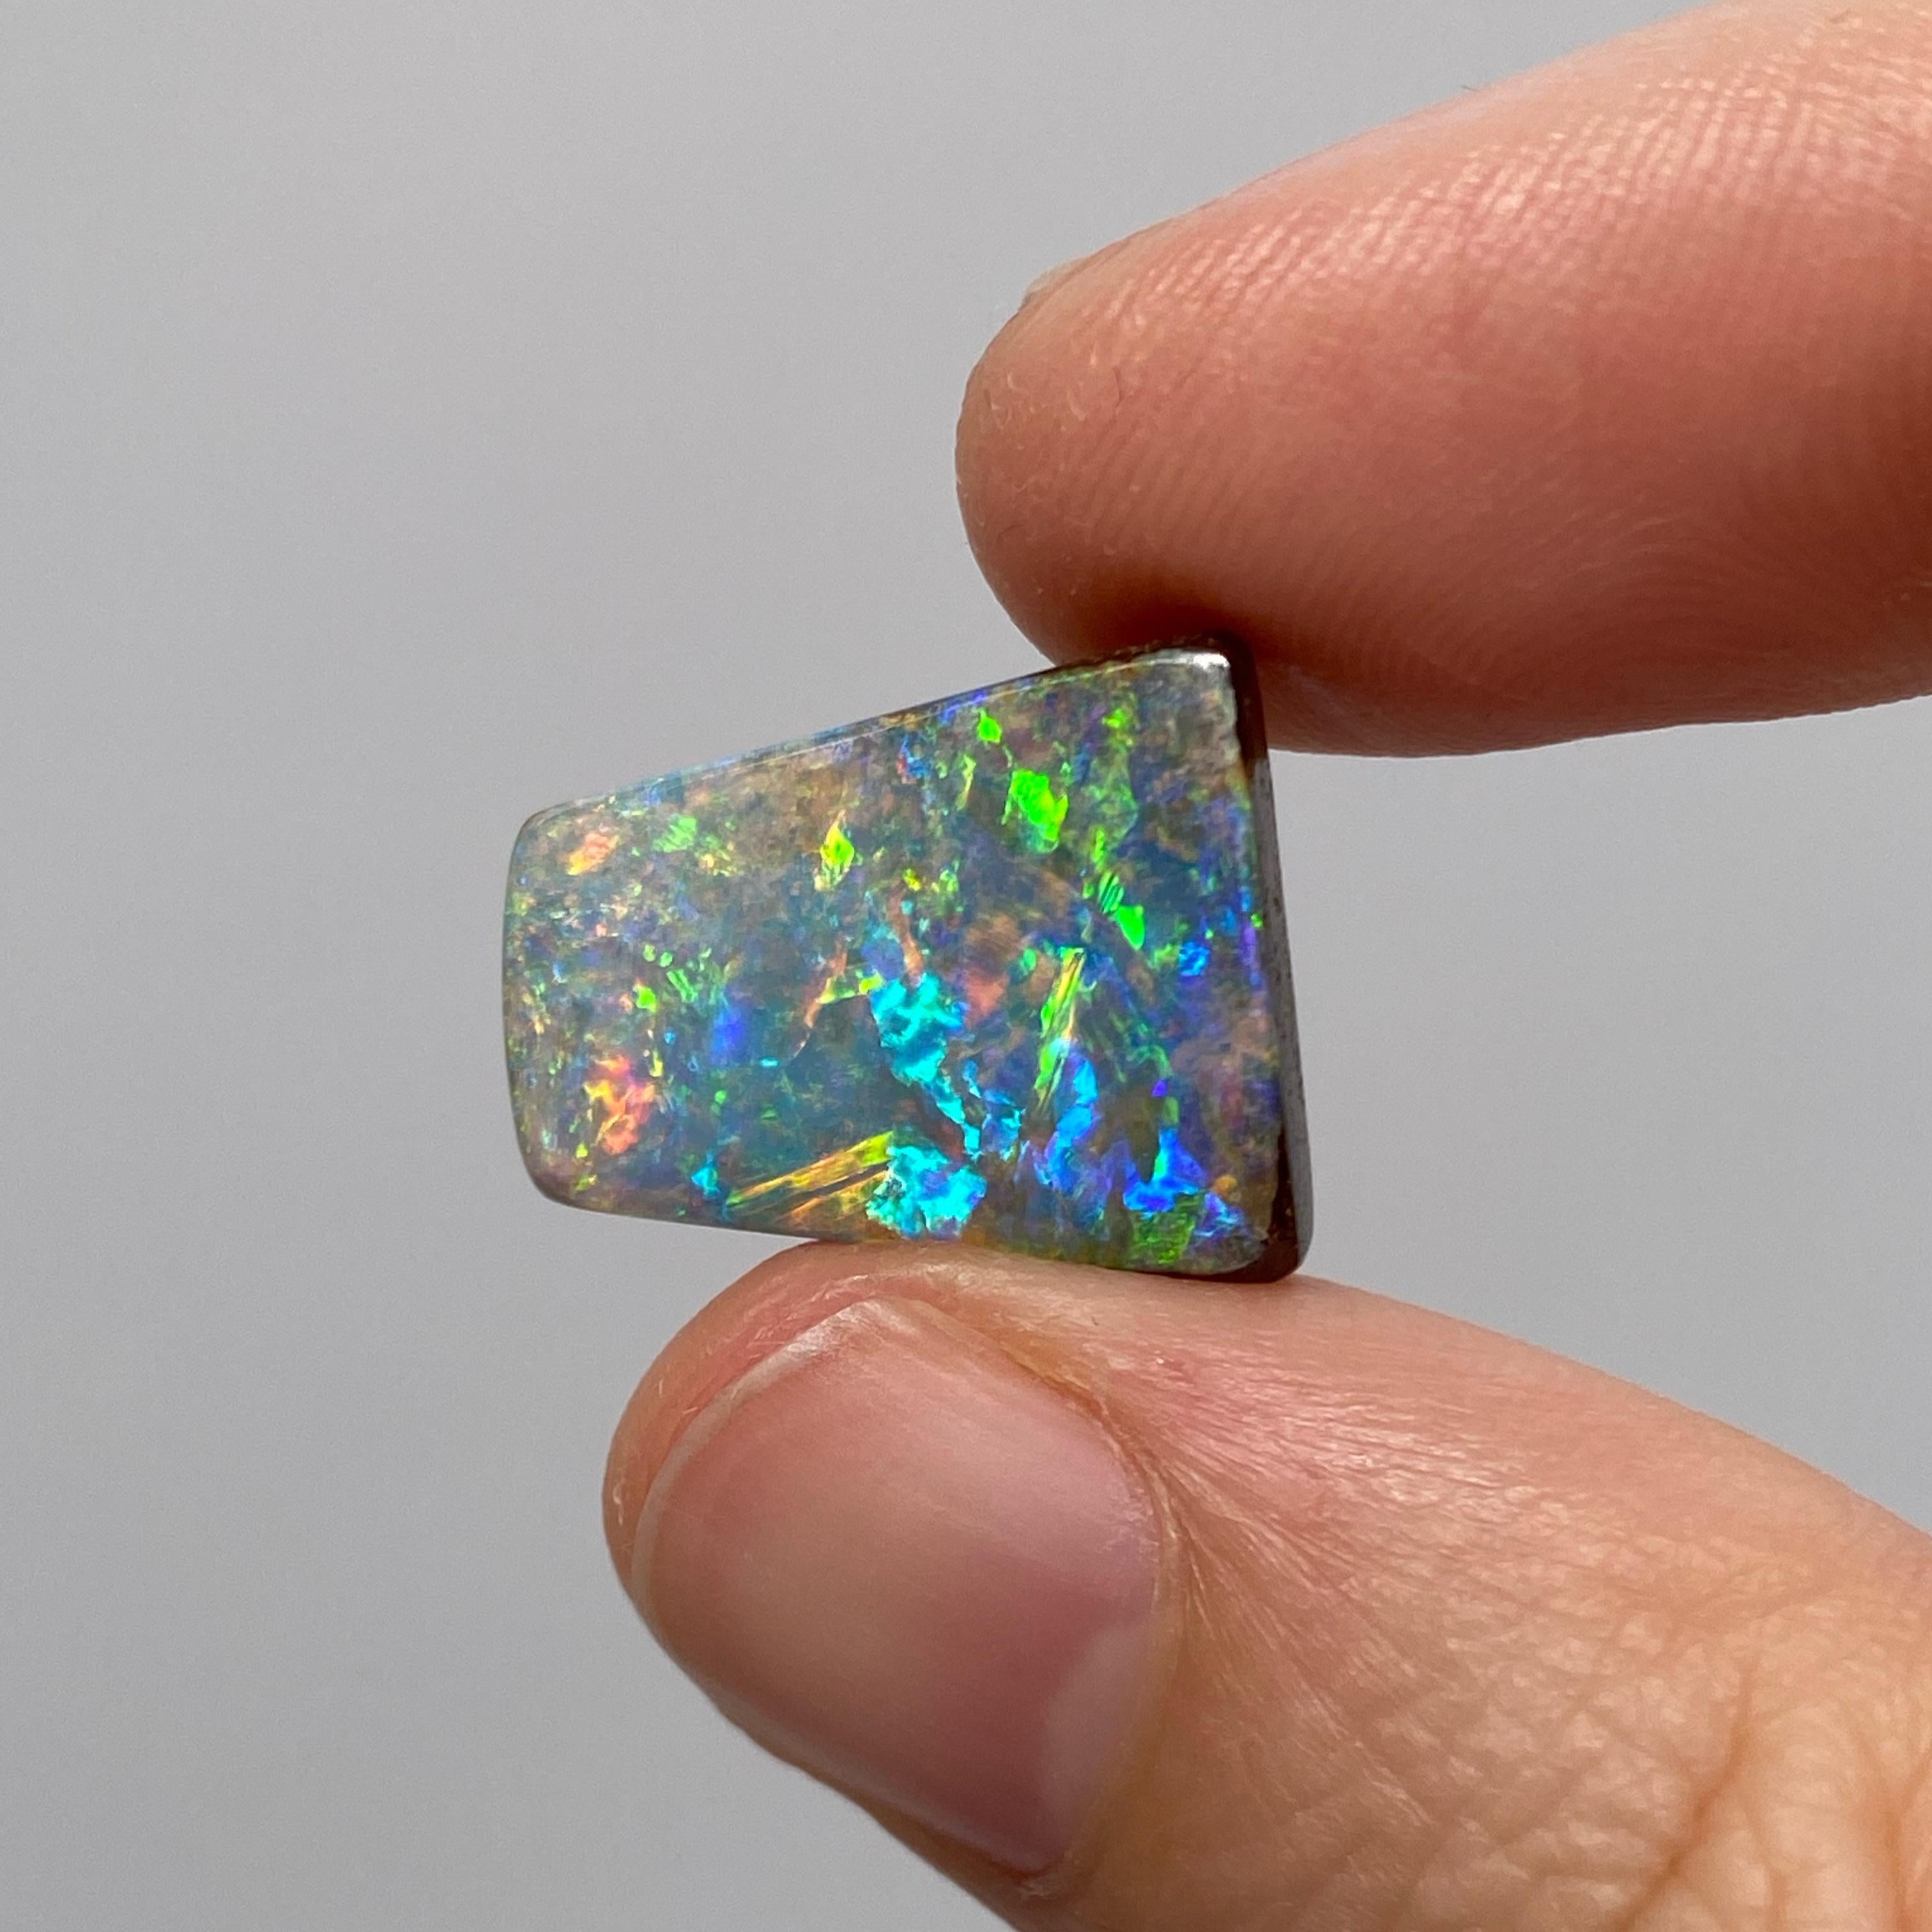 This gem grade natural solid Australian boulder opal was mined in western Queensland, Australia by a female opal miner. It has all the colors of the rainbow present and a great play-of-color. It is very bright and has a lighter (N6 / N7) body tone